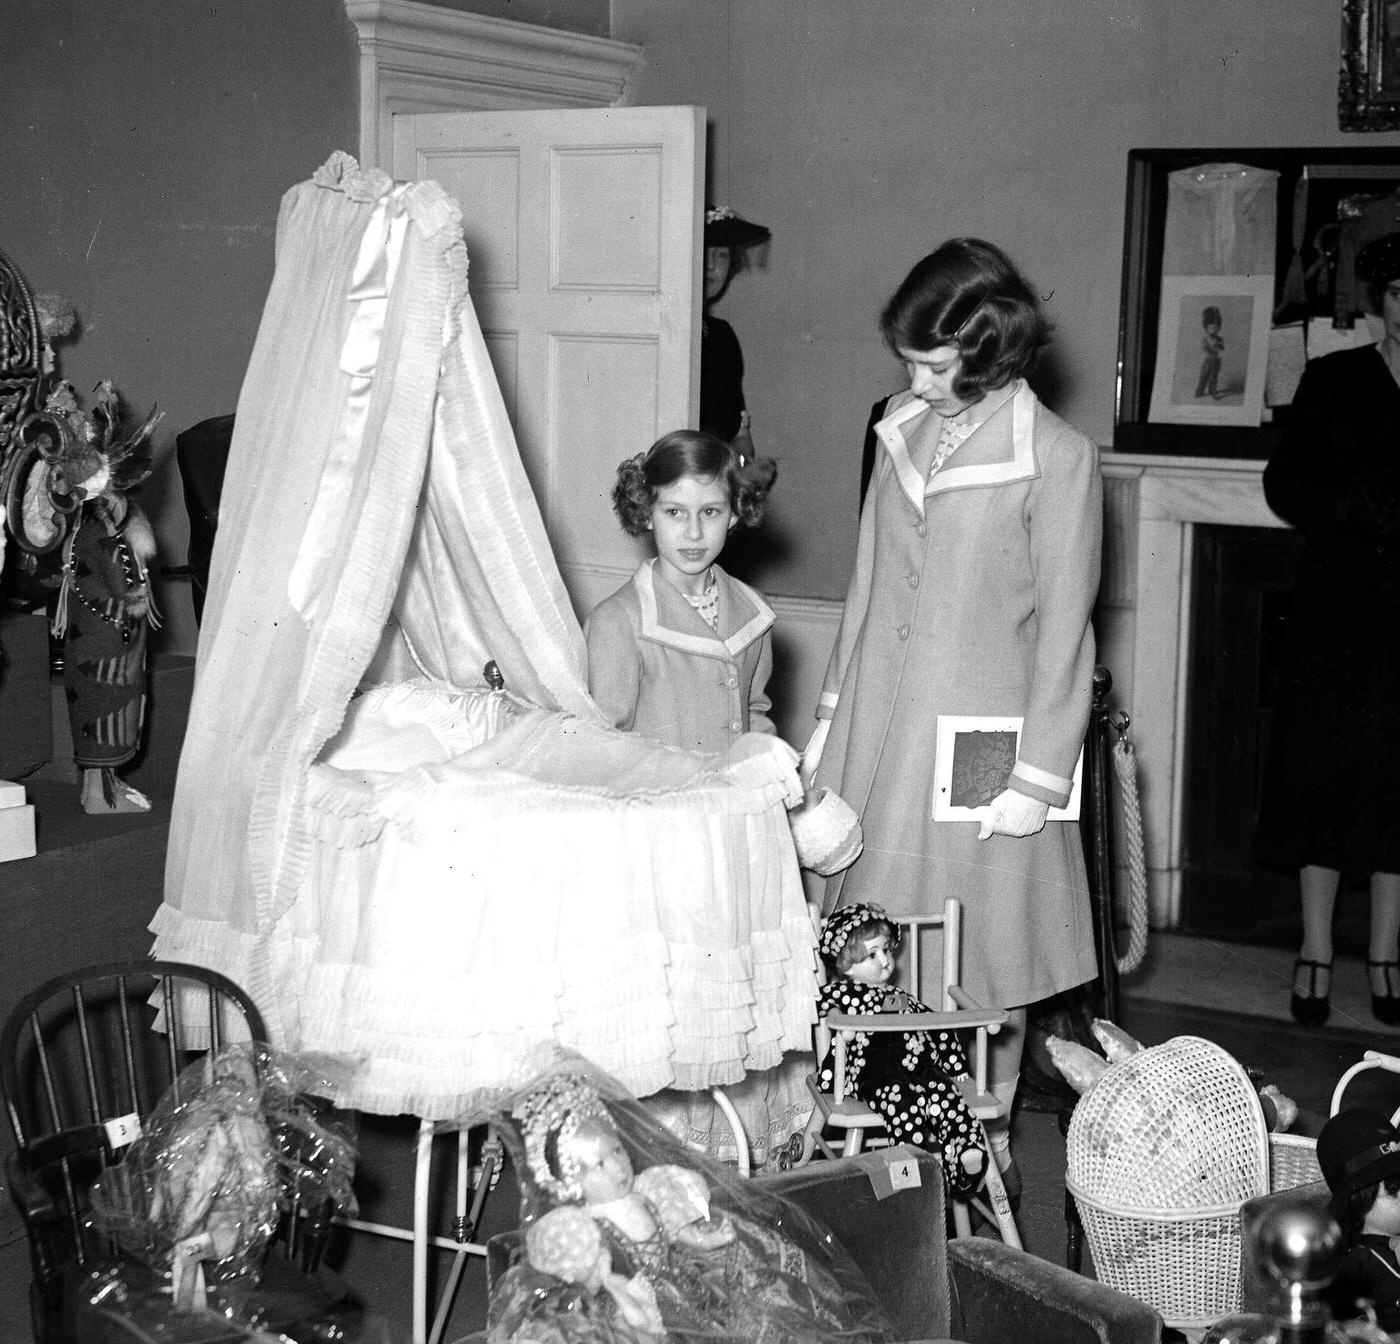 Princesses Elizabeth and Margaret view the cot that they both used as babies during their visit to an exhibition of royal and historic treasures at their old home, 145 Piccadilly, London, 28th July 1939.